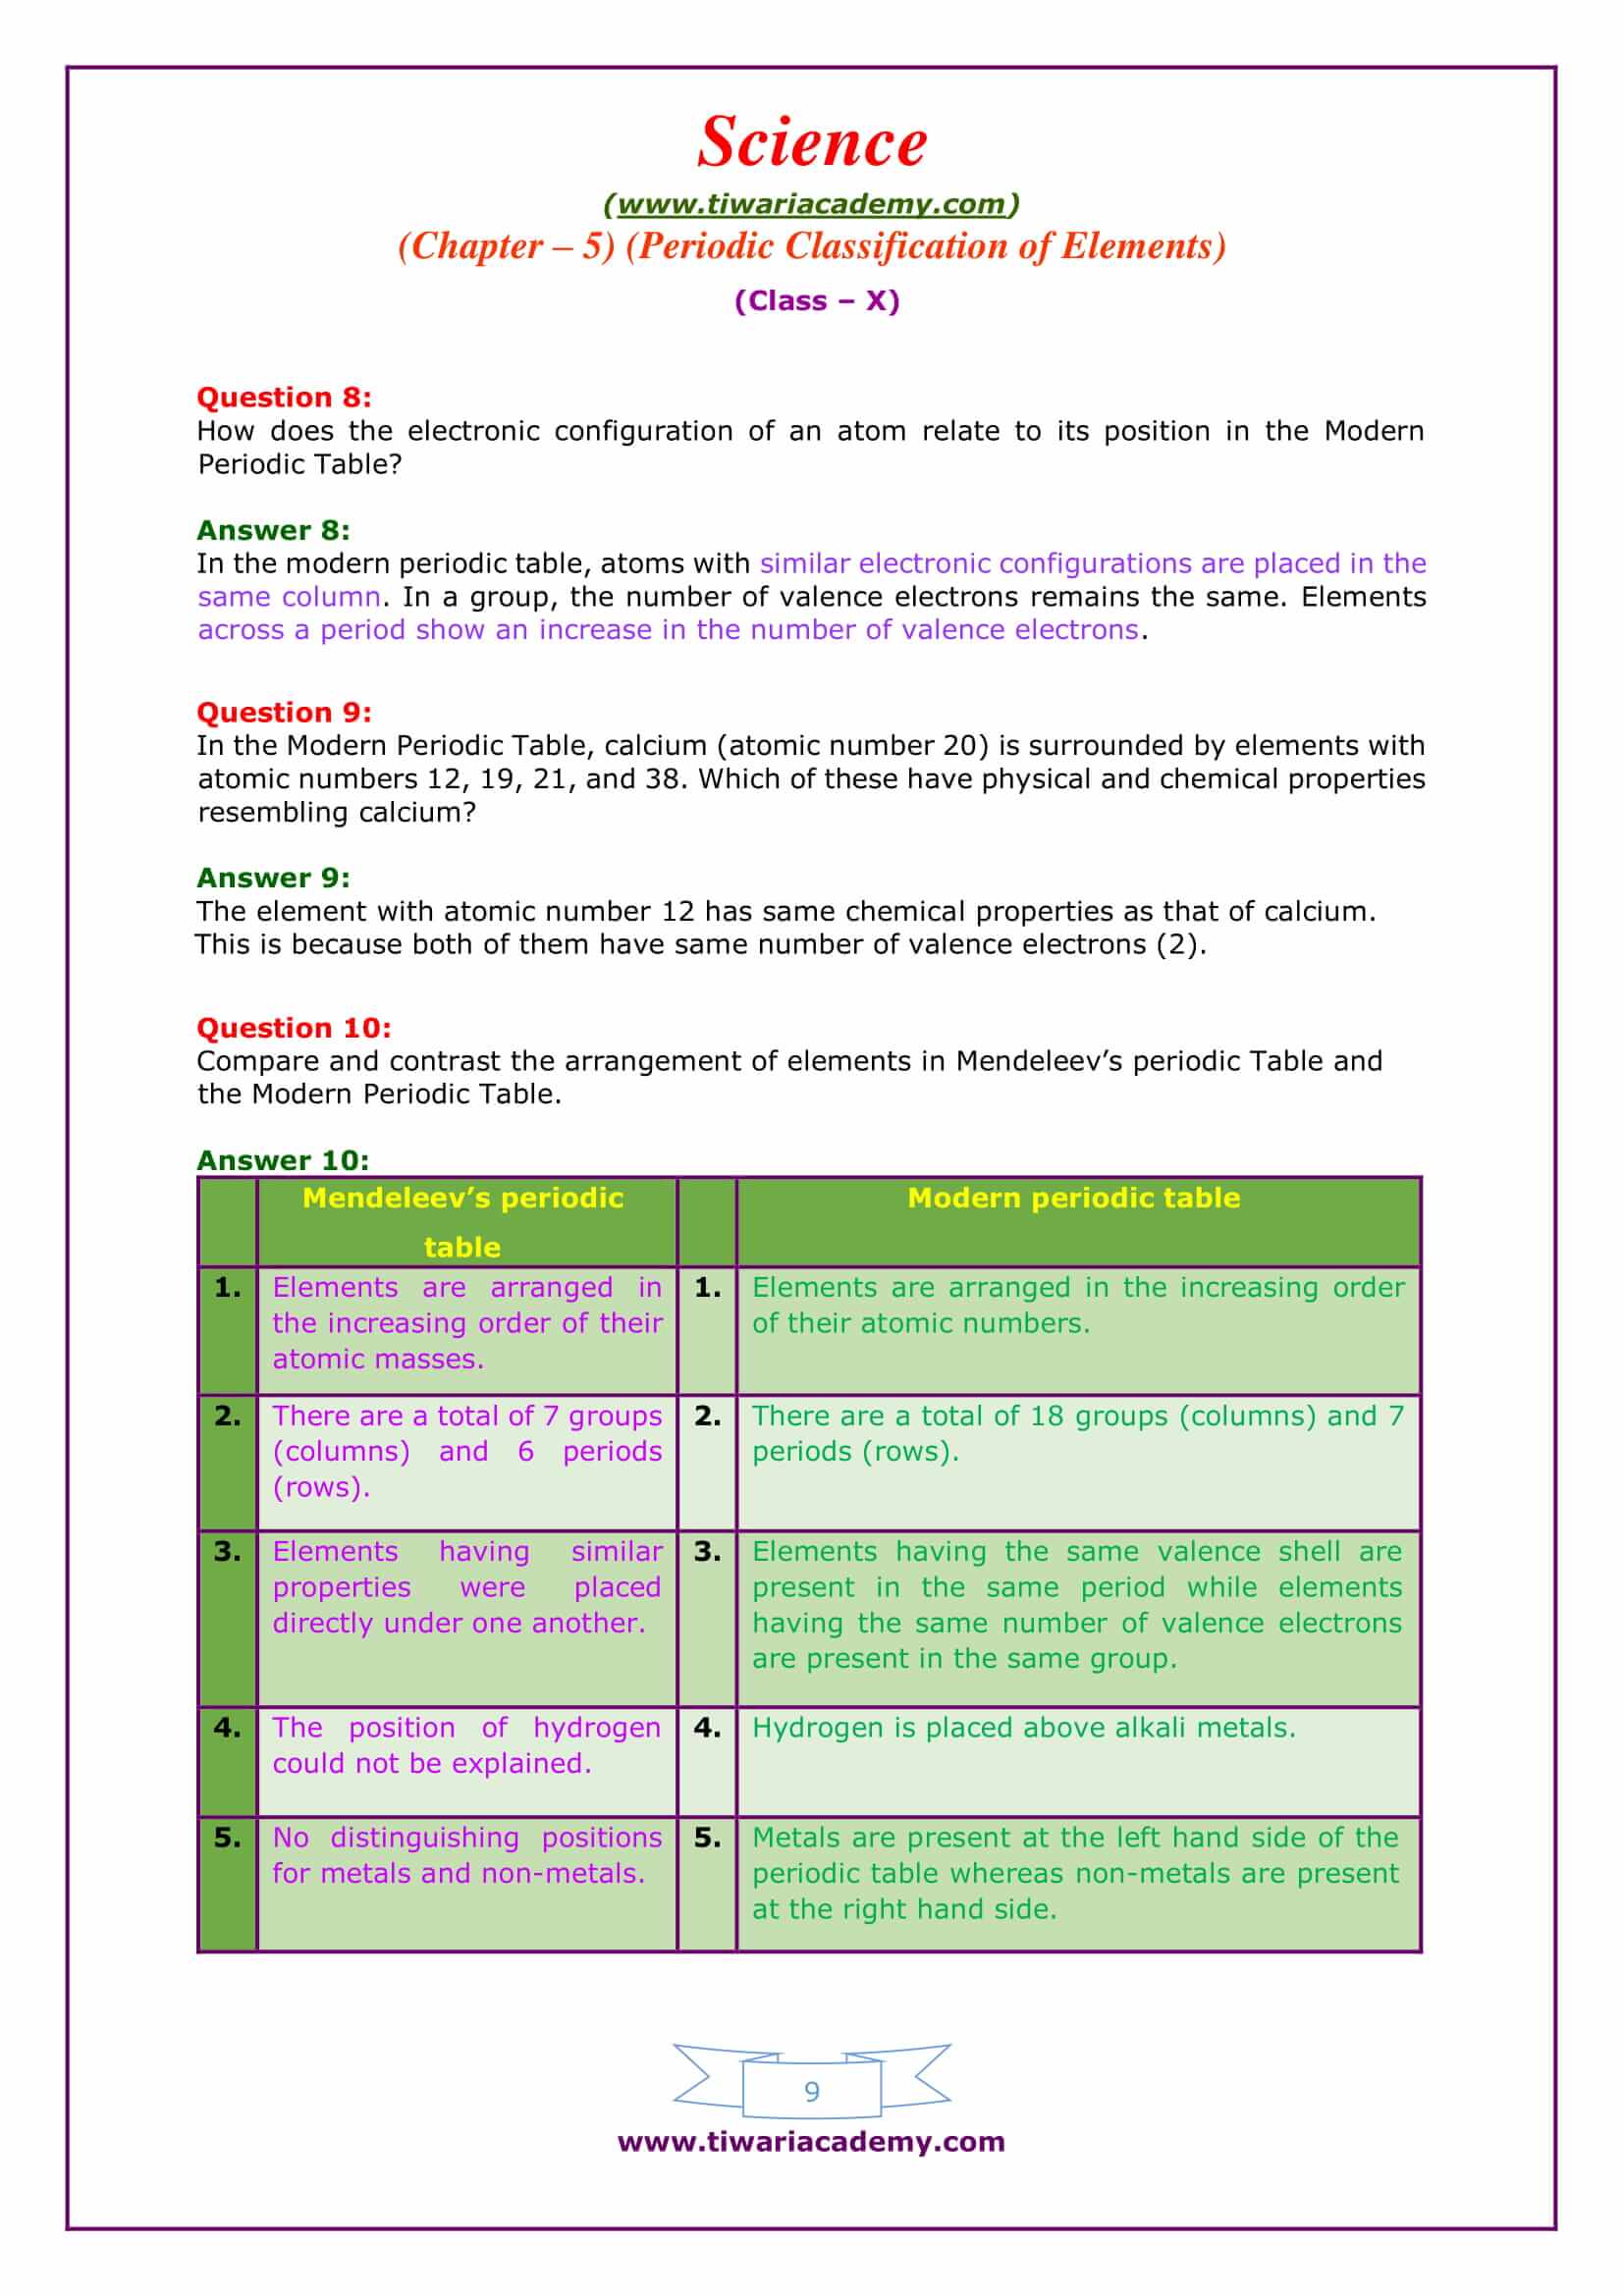 NCERT Solutions for Class 10 Science Chapter 5 Periodic Classification of elements Exercises in pdf form